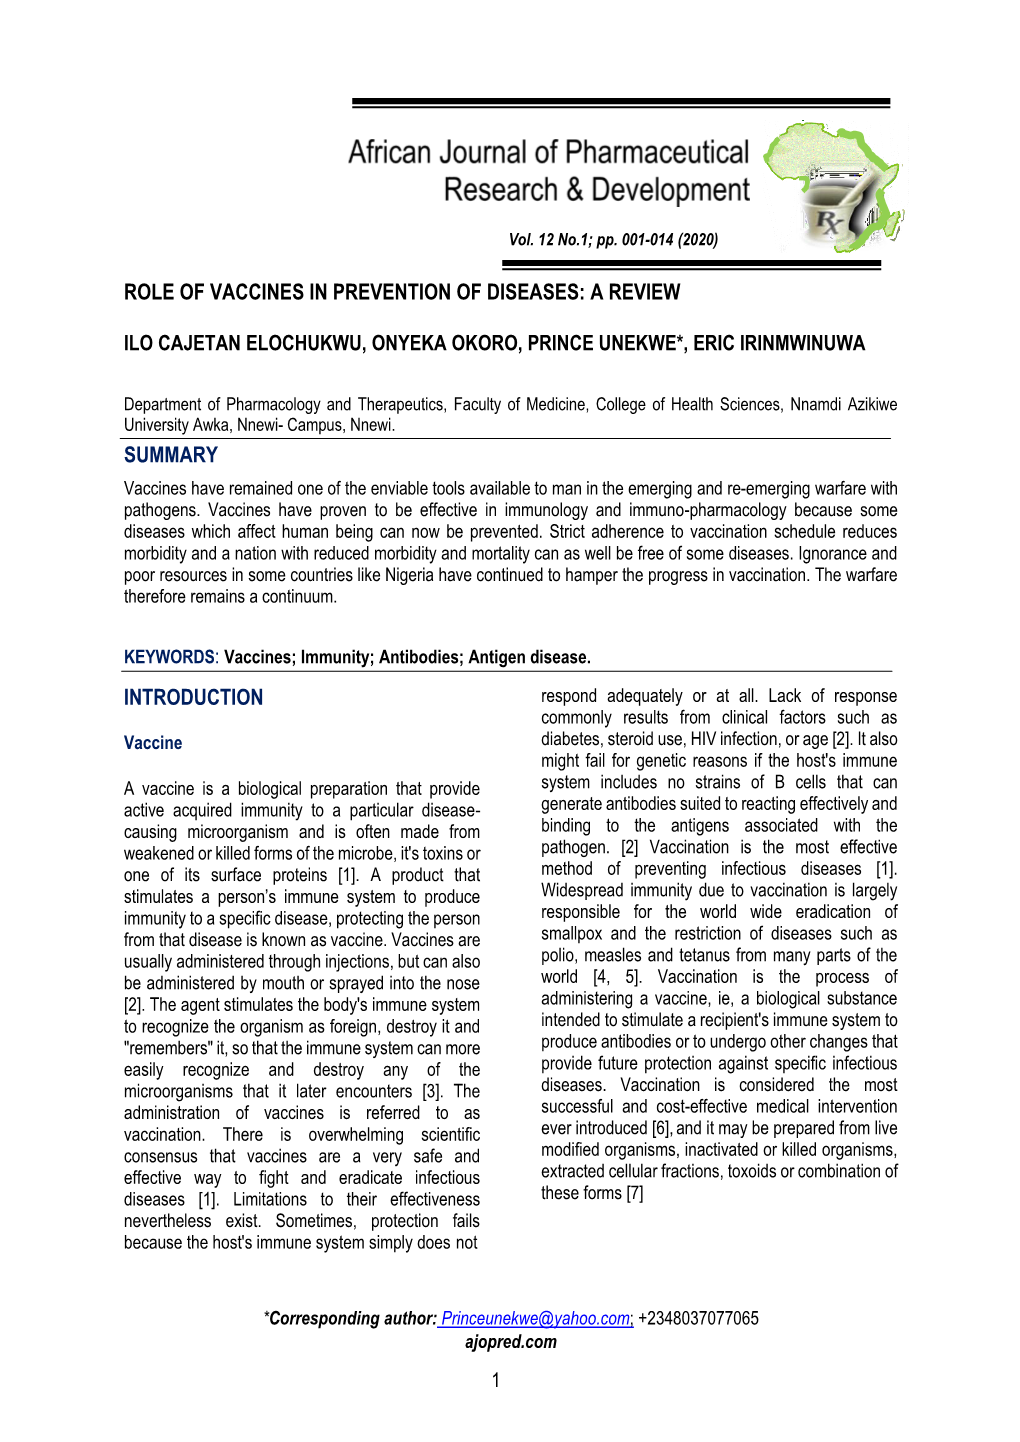 Role of Vaccines in Prevention of Diseases: a Review